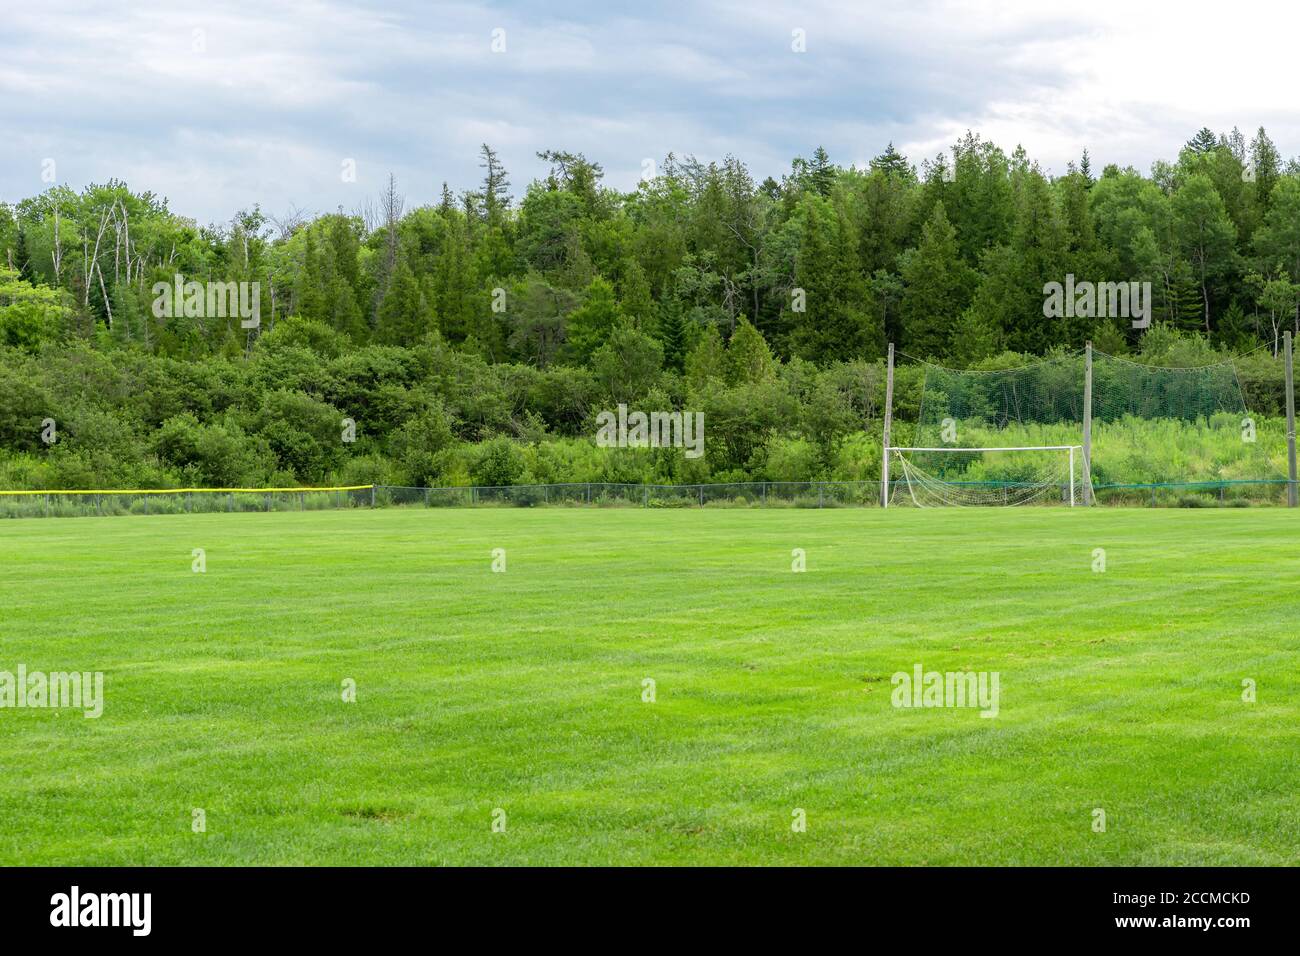 An empty soccer field under an overcast sky. The grass is well maintained, and a goal net is in the distance. Stock Photo